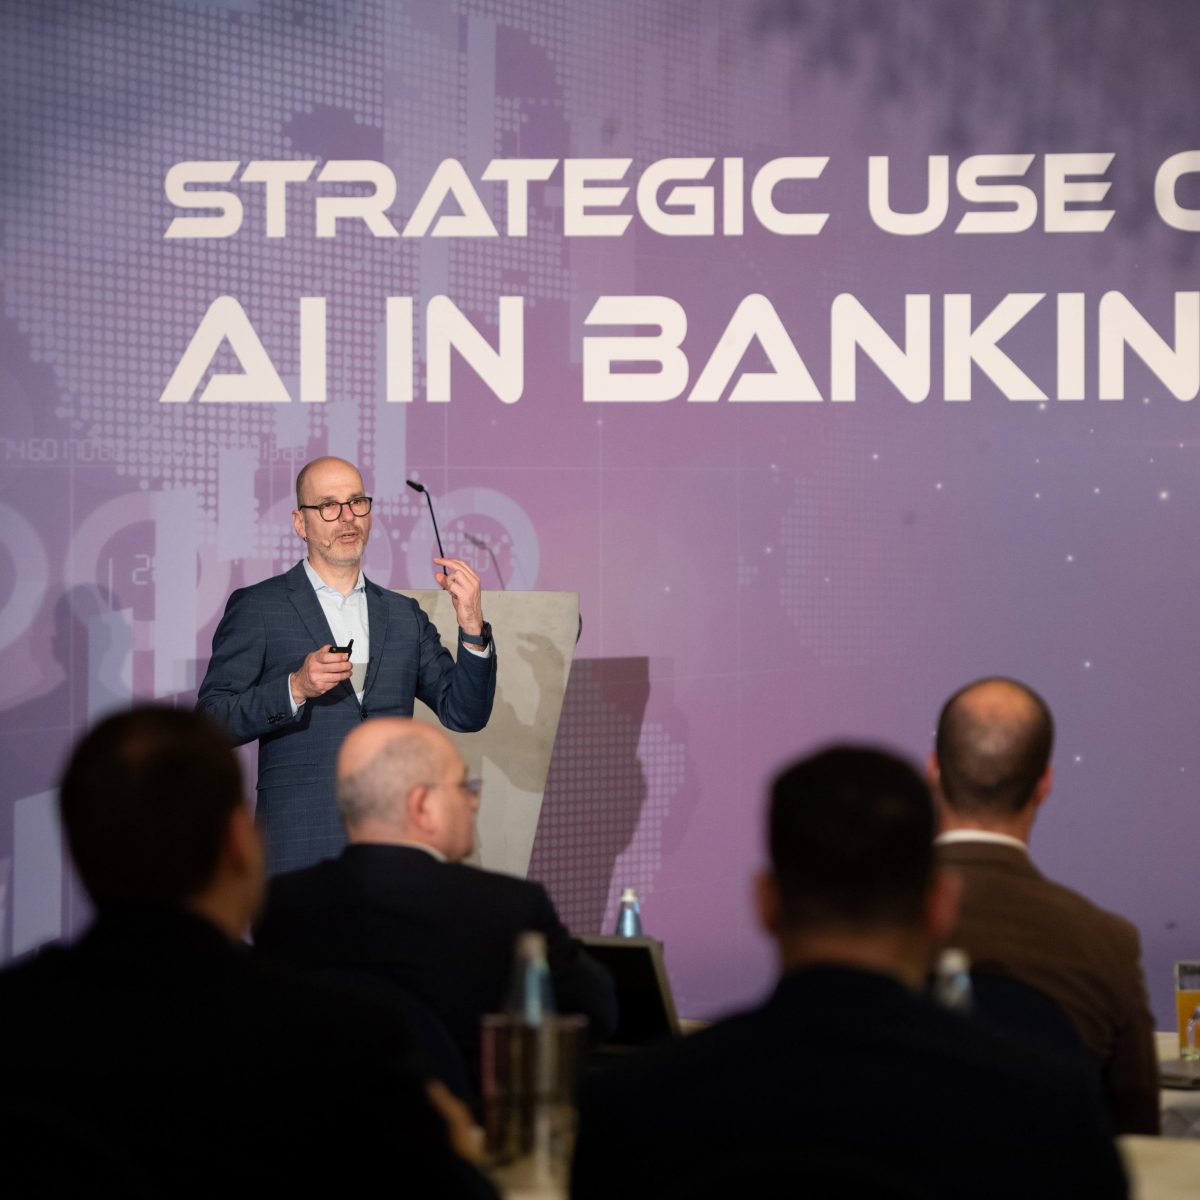 BOV TALKS ARTIFICIAL INTELLIGENCE IN THE BANKING WORLD